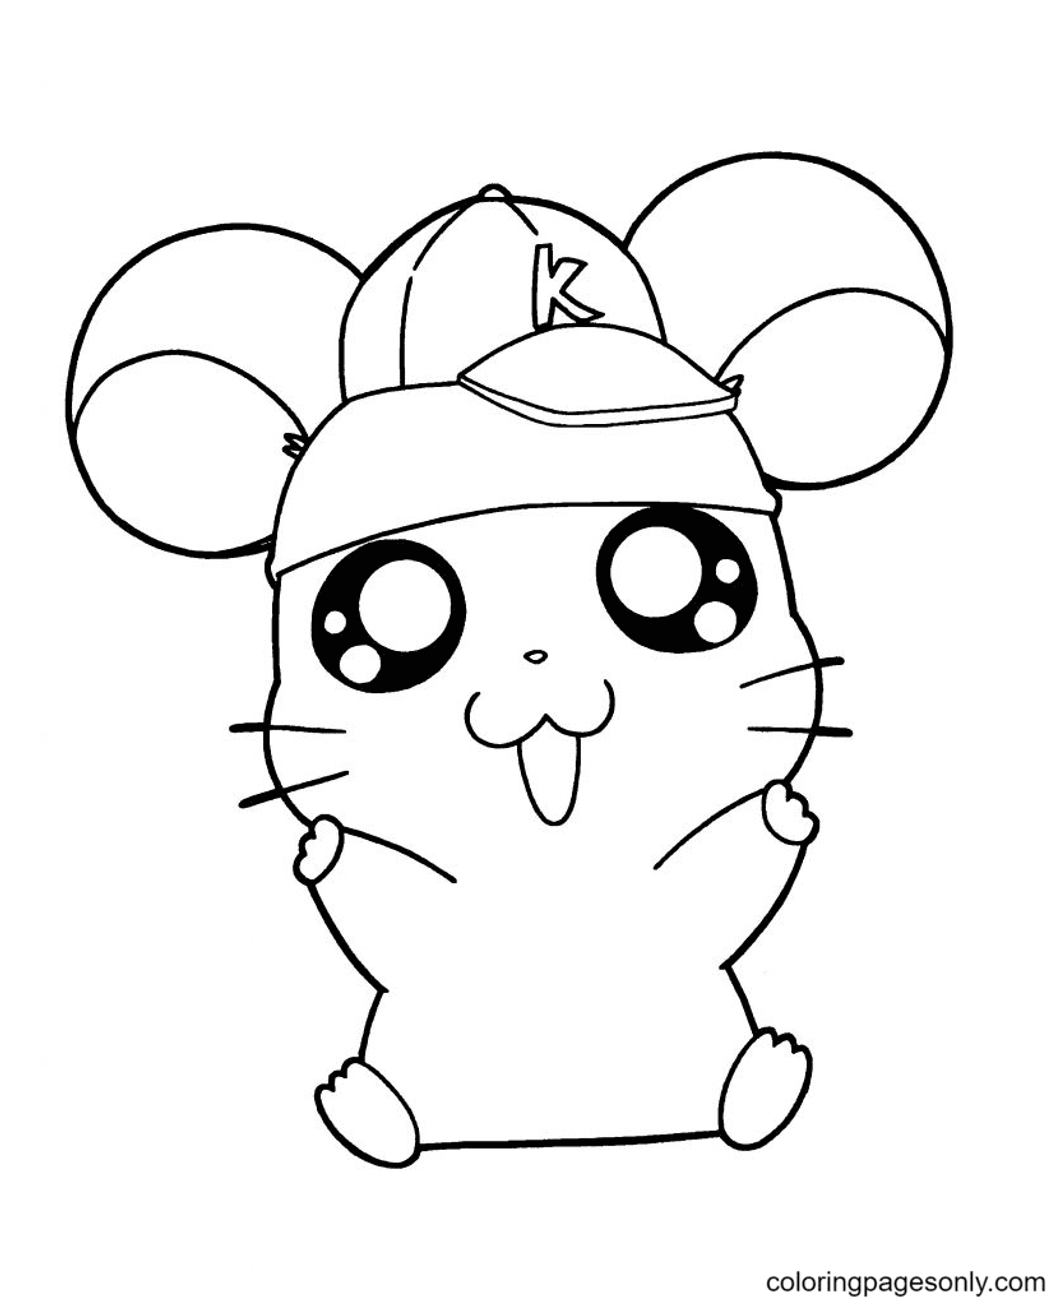 if you take a mouse to school coloring pages